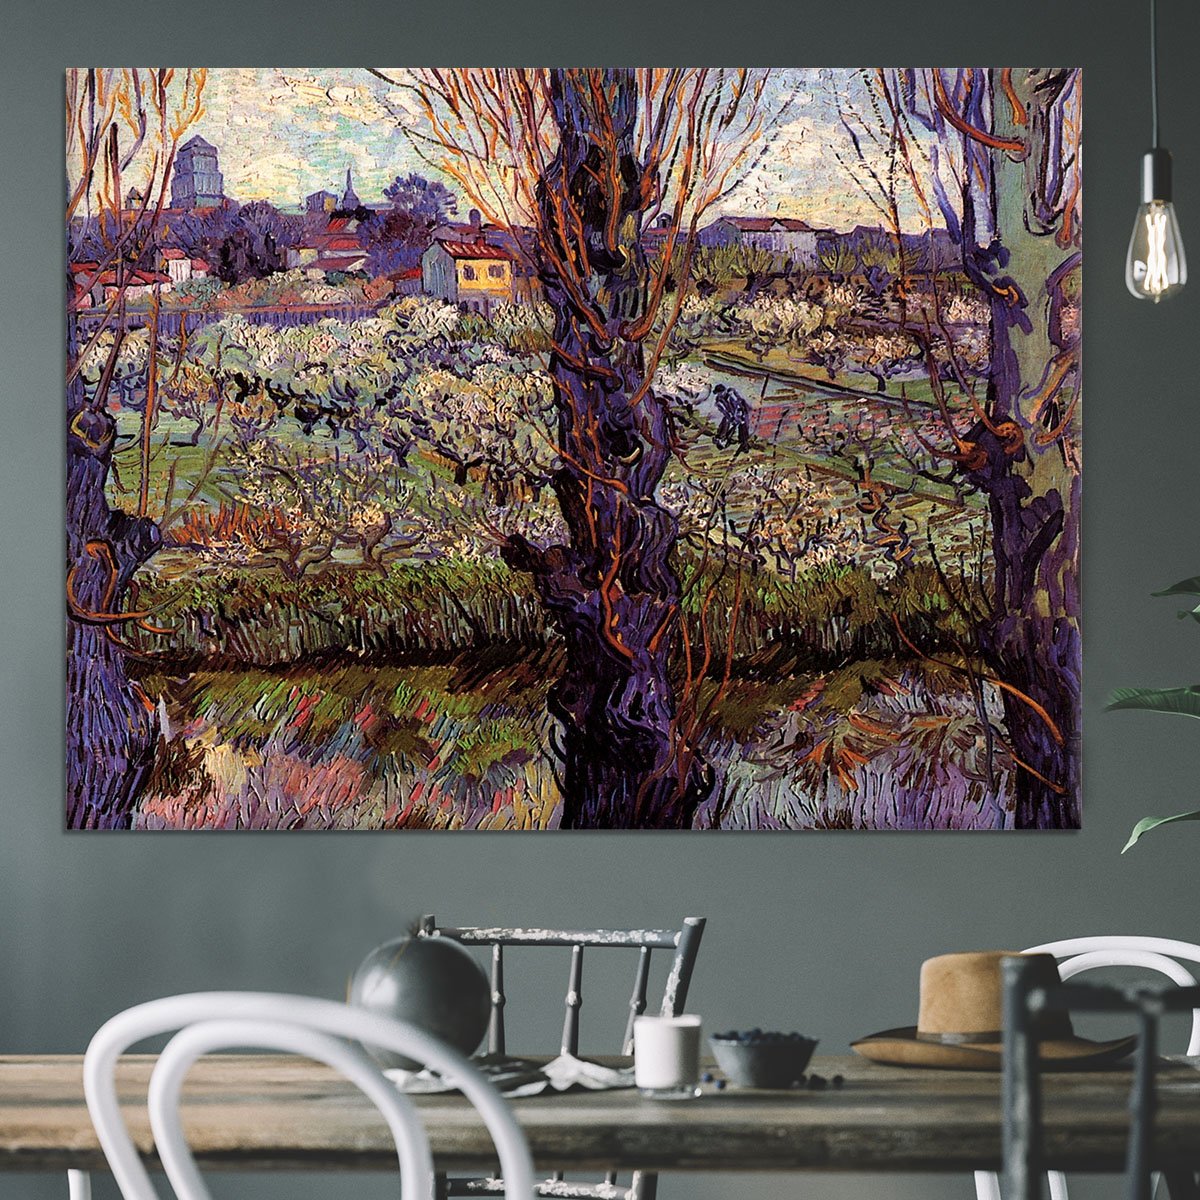 Orchard in Blossom with View of Arles by Van Gogh Canvas Print or Poster